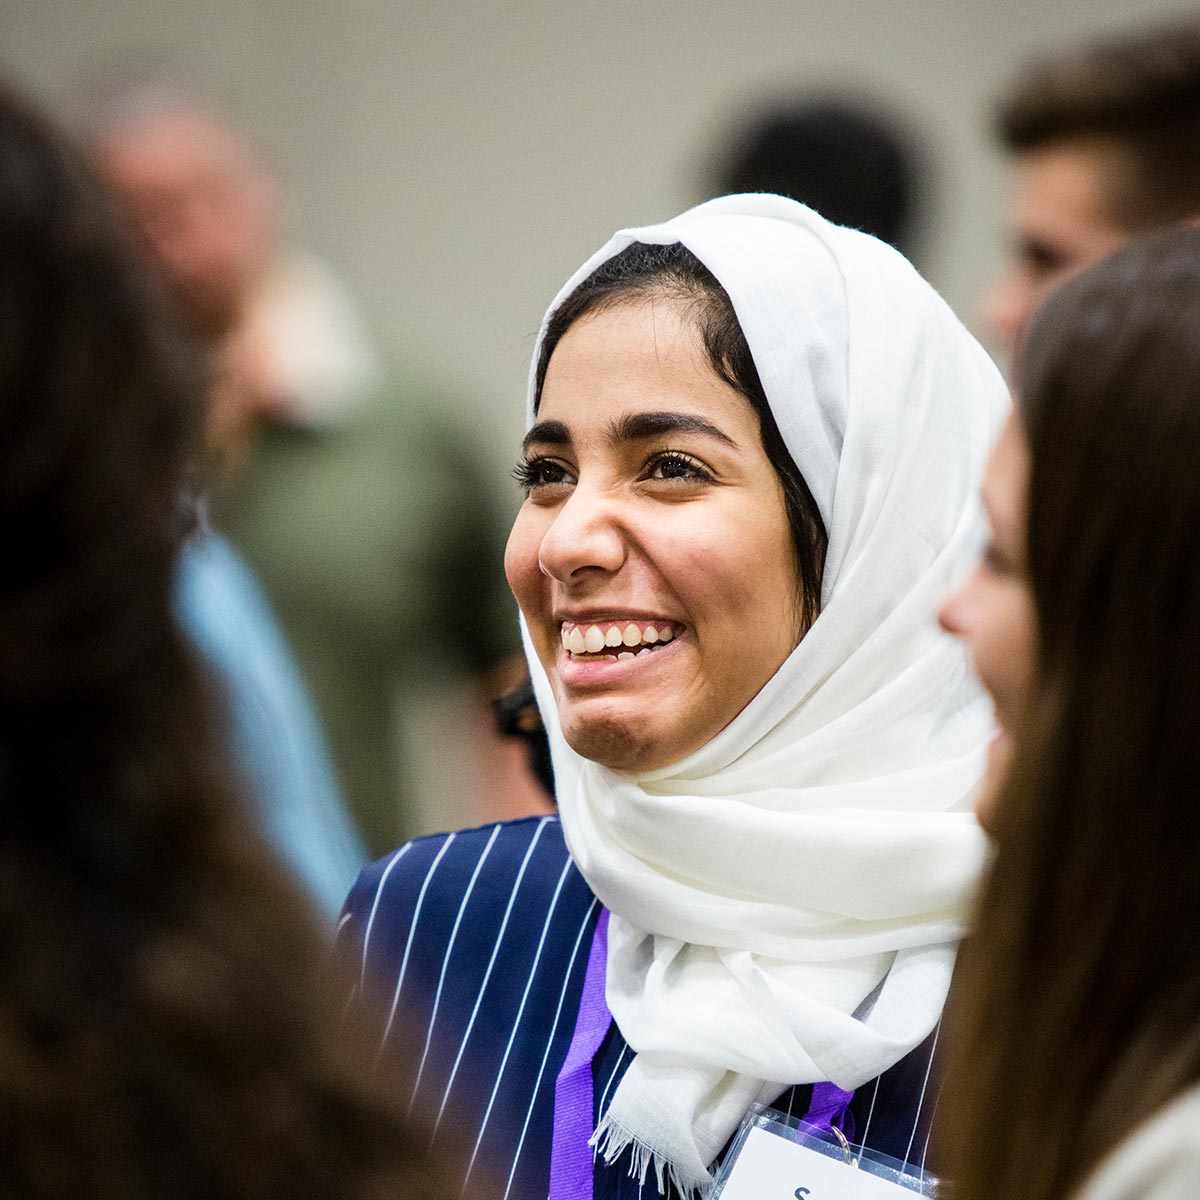 Student smiles brightly while mingling with other students and alumni.